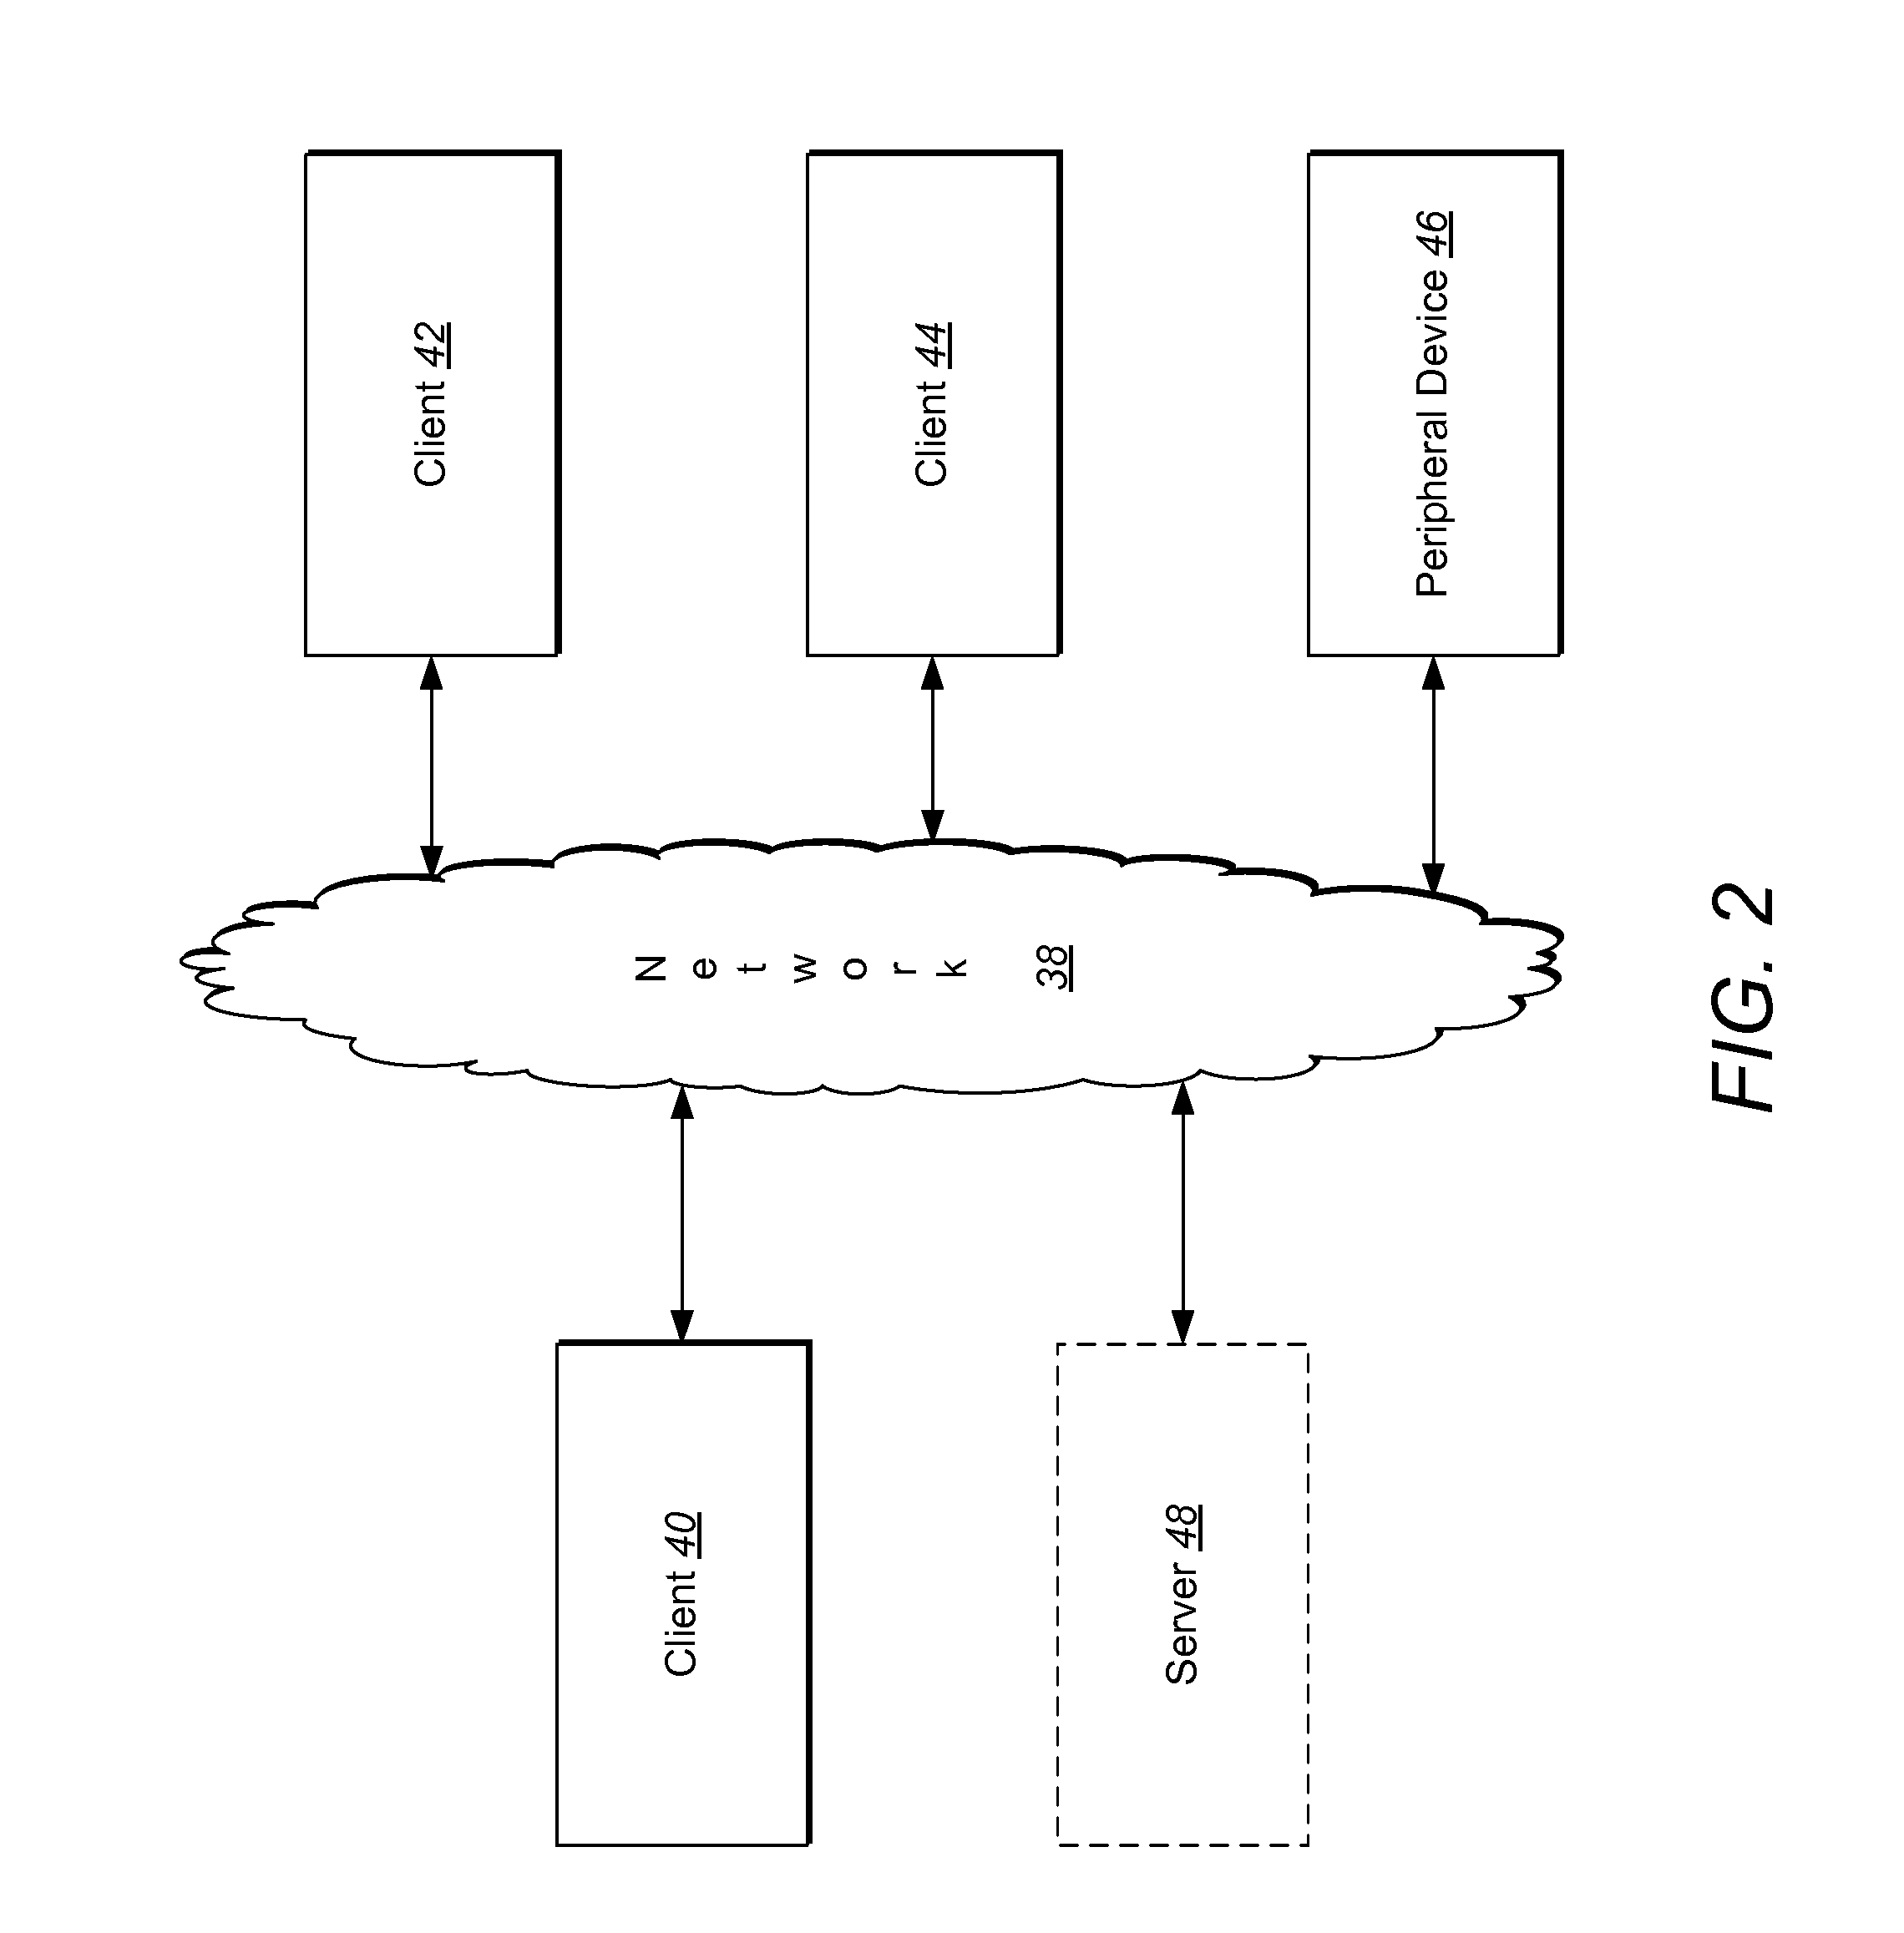 Systems and Methods for Creating and Maintaining a Customized Version of a Master Document